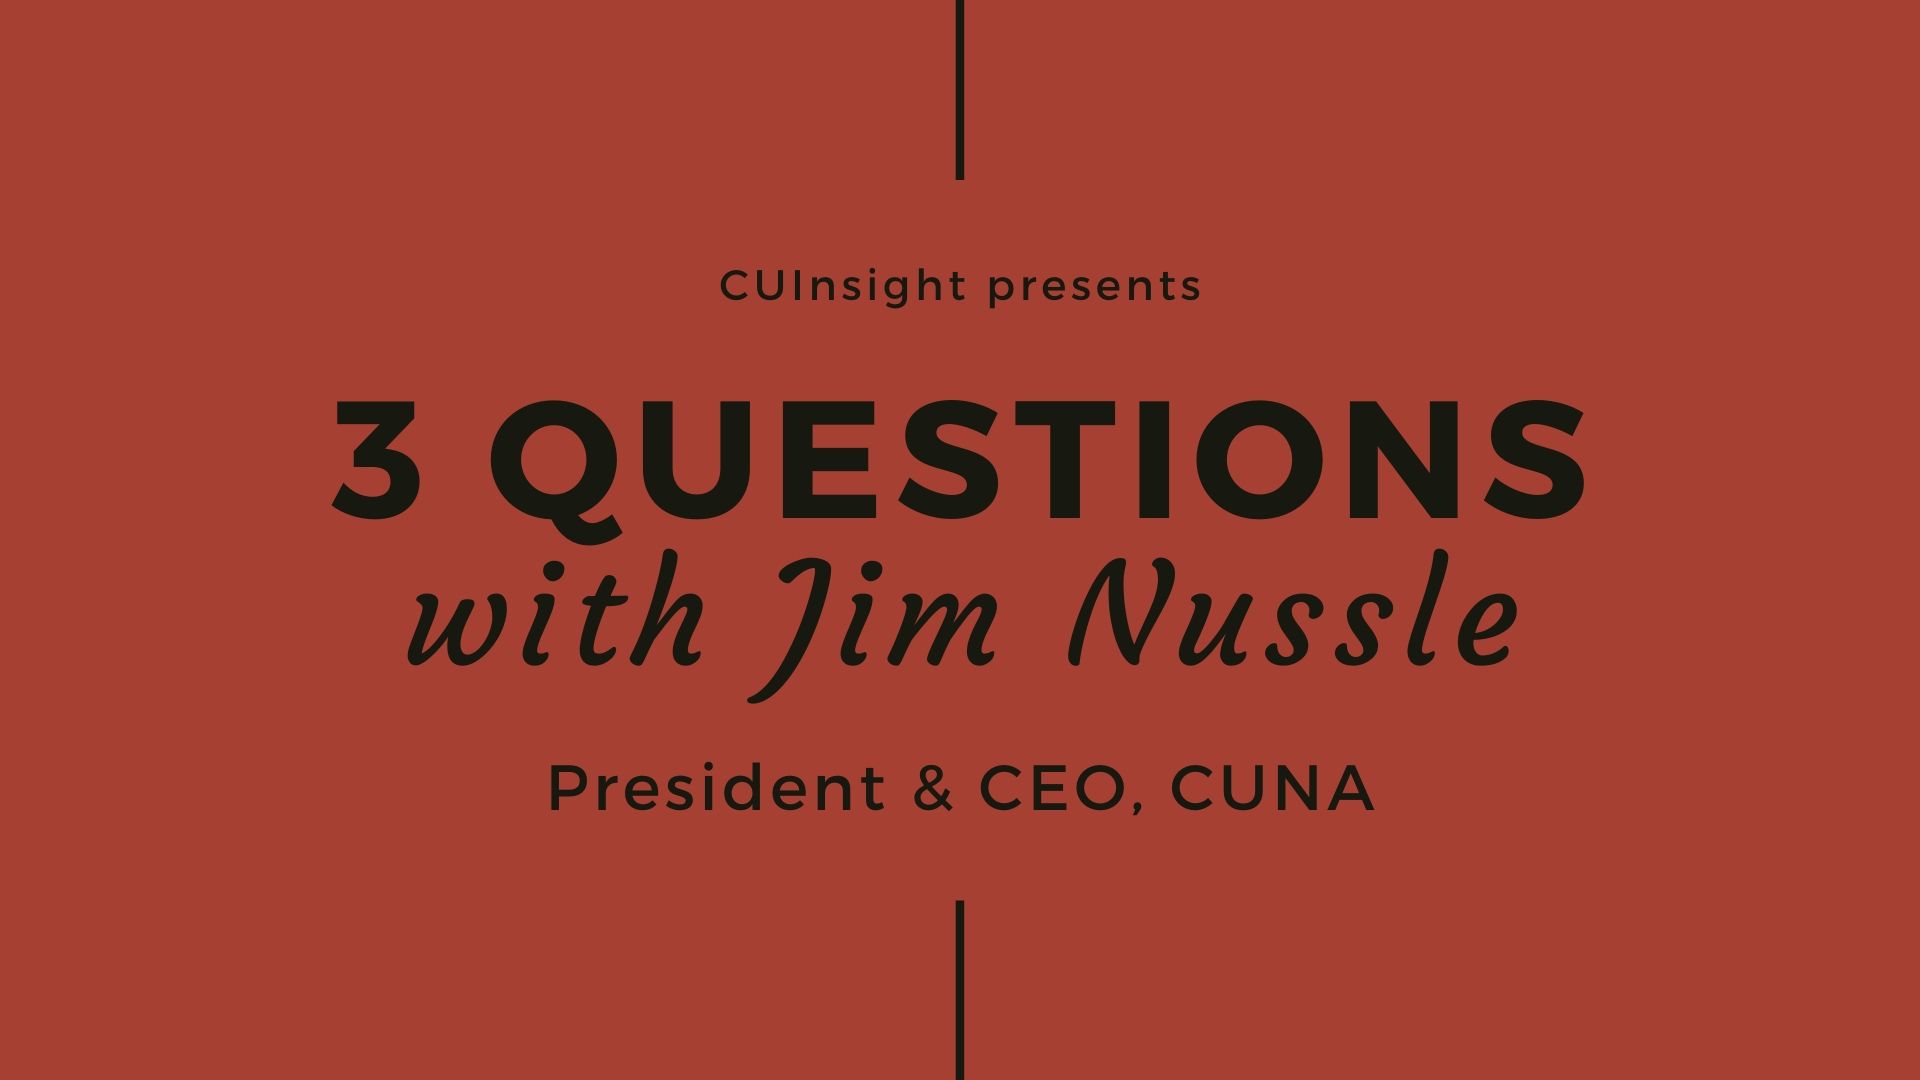 3 questions with CUNA’s Jim Nussle